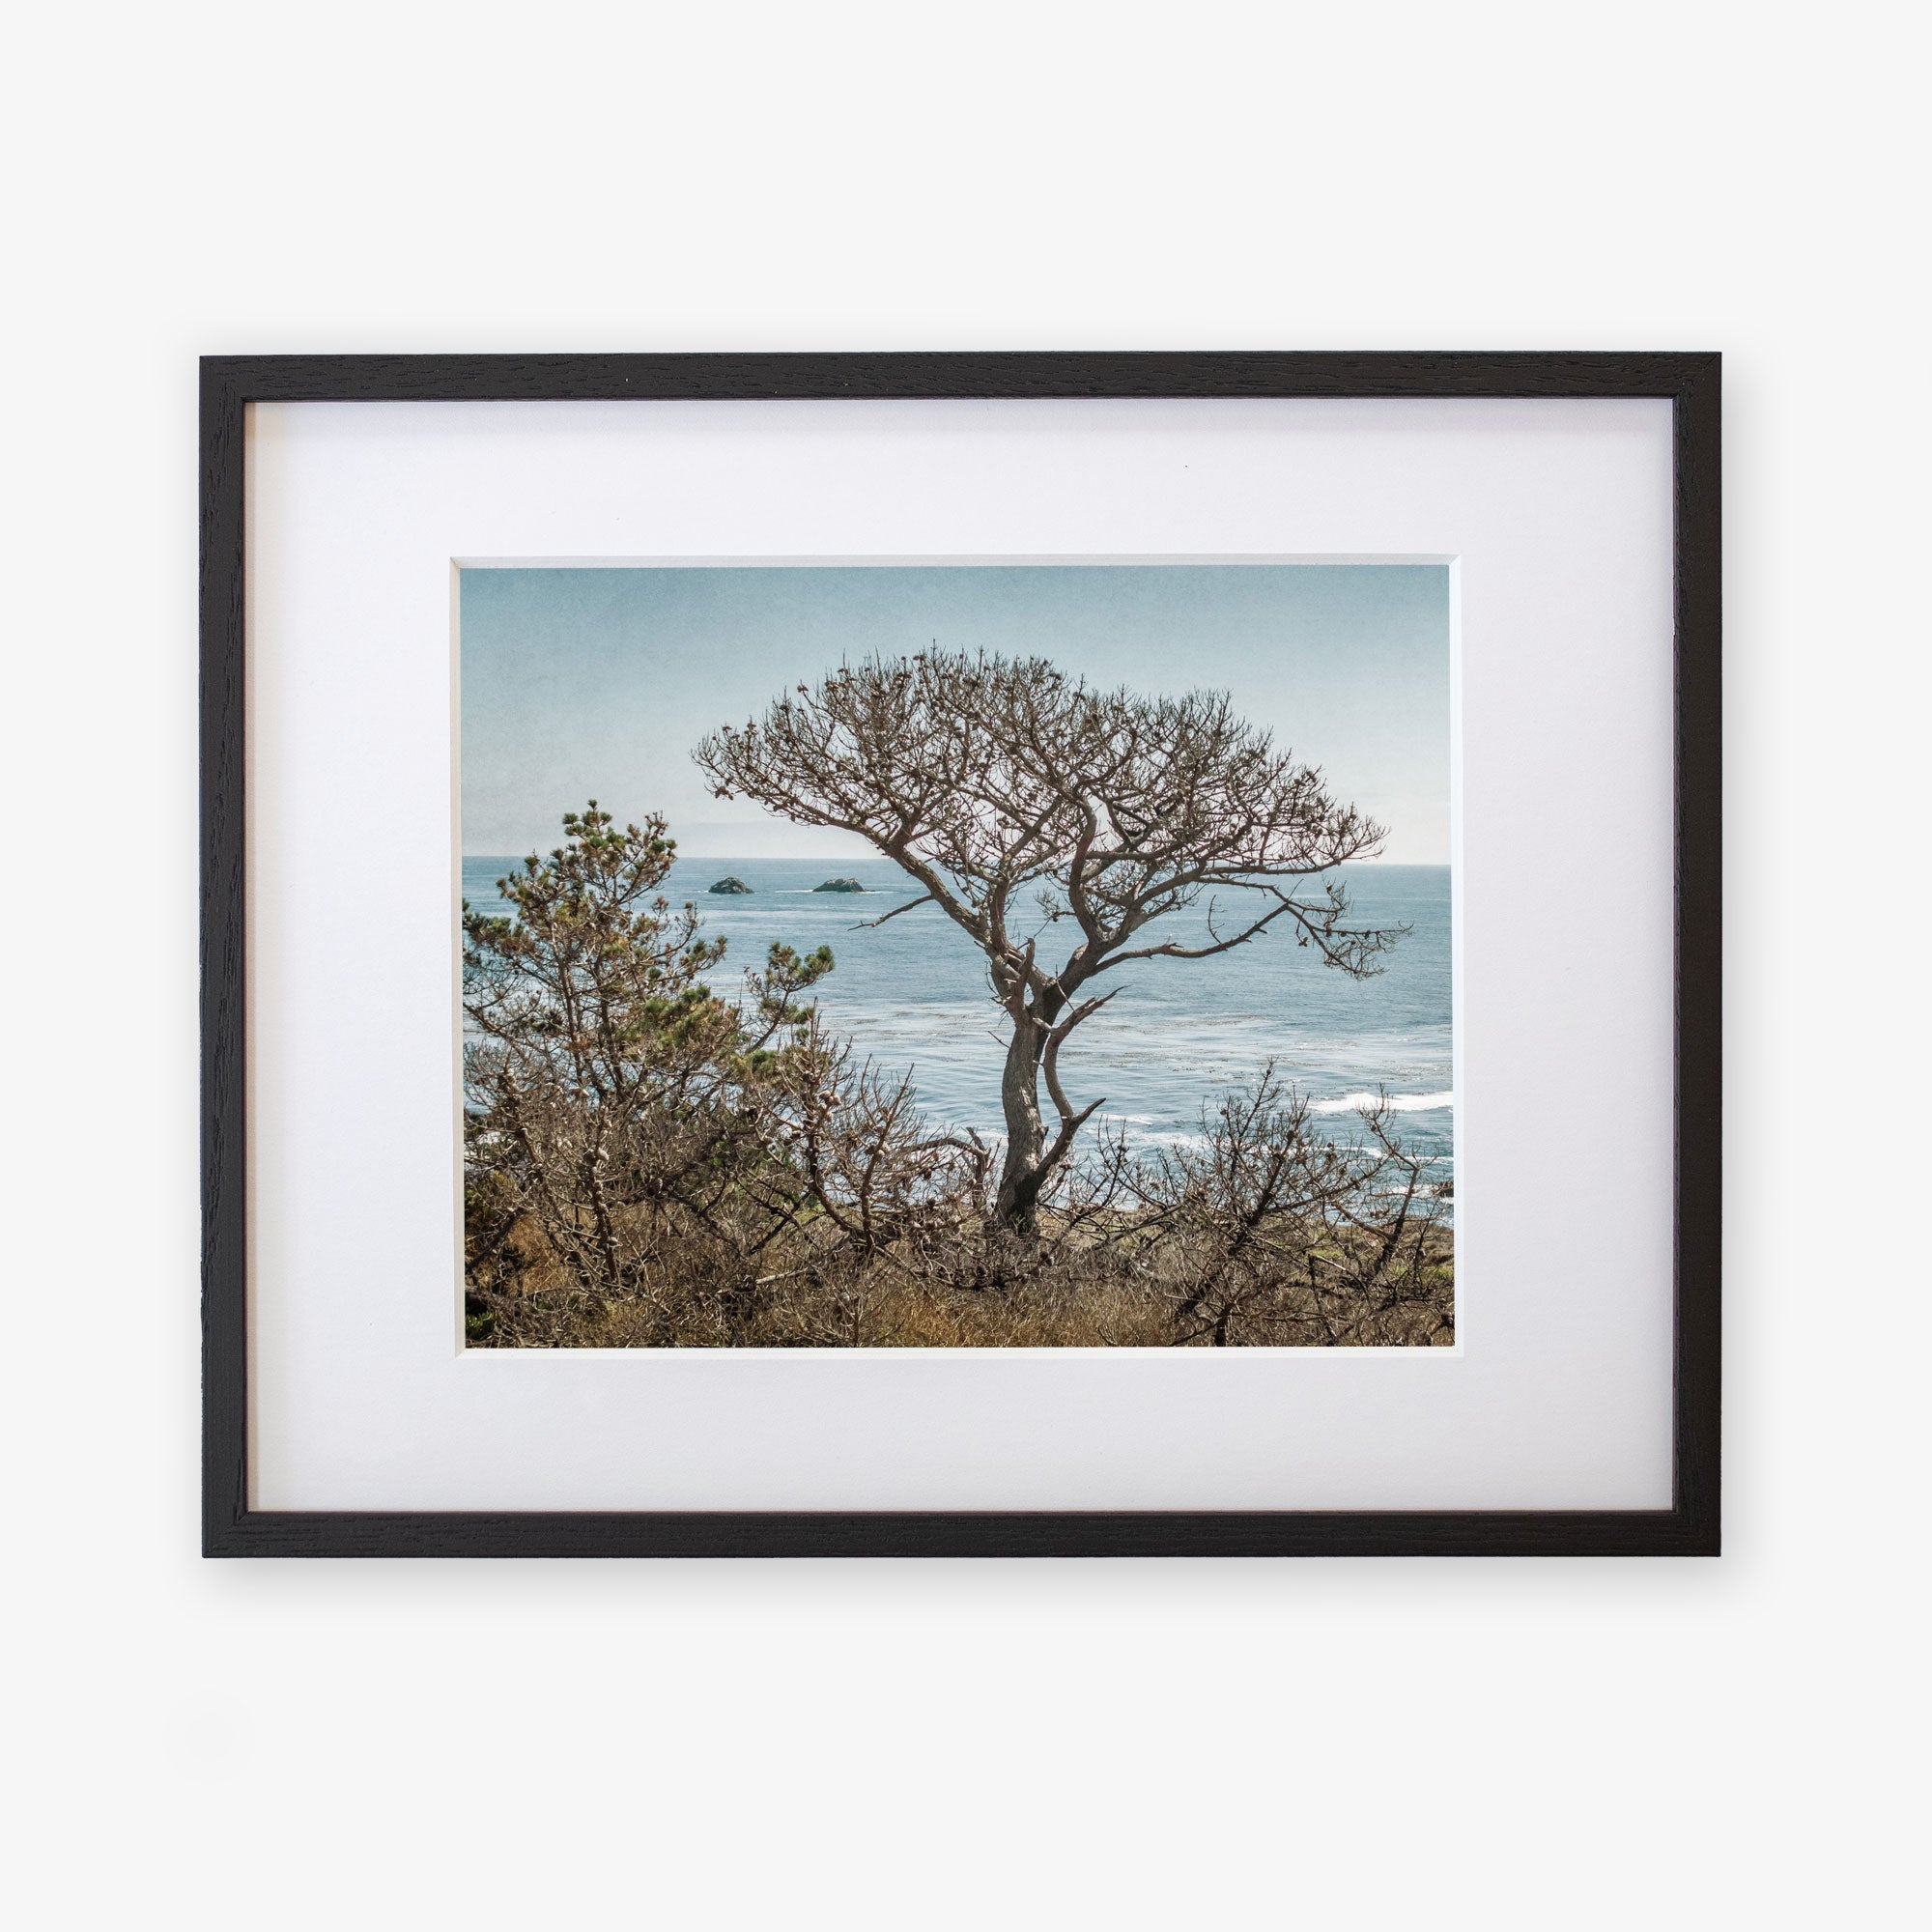 Unframed picture of a California Landscape Art in Big Sur, &#39;Wind Blown Tree&#39; by Offley Green, featuring a windswept tree against a backdrop of the sea and distant islands, displayed on a white background.